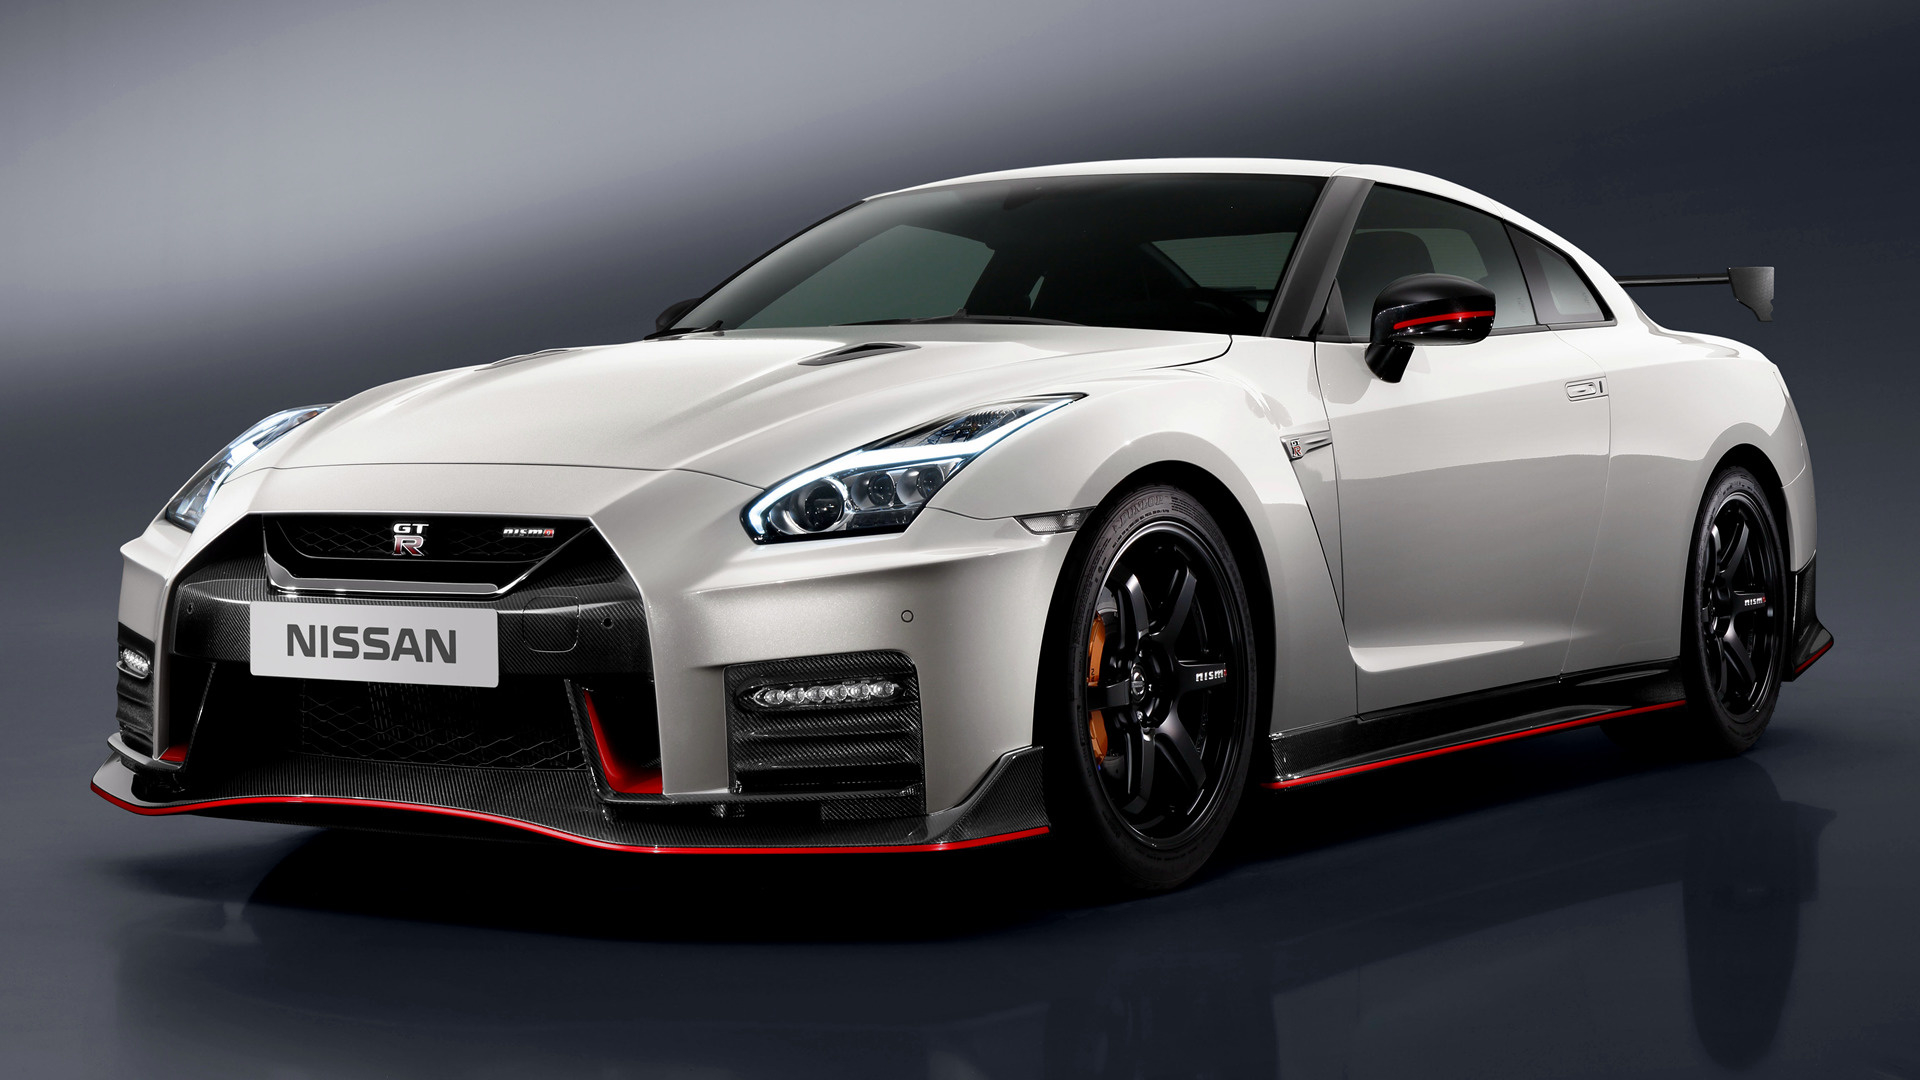 1920x1080 2016 Nissan GT-R Nismo Wallpapers and HD Images | Car Pixel